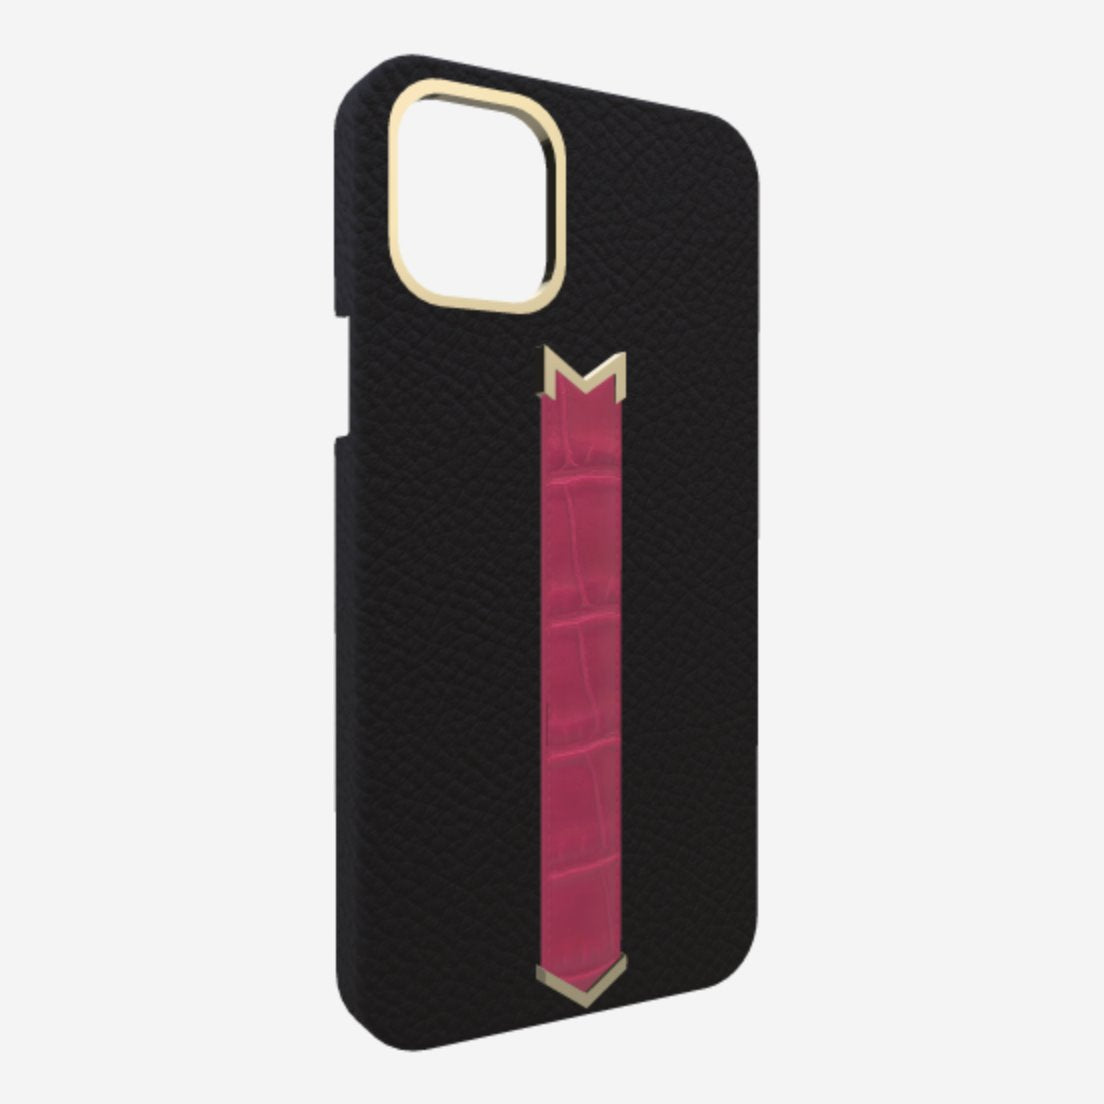 Gold Finger Strap Case for iPhone 13 in Genuine Calfskin and Alligator Bond Black Fuchsia Party 